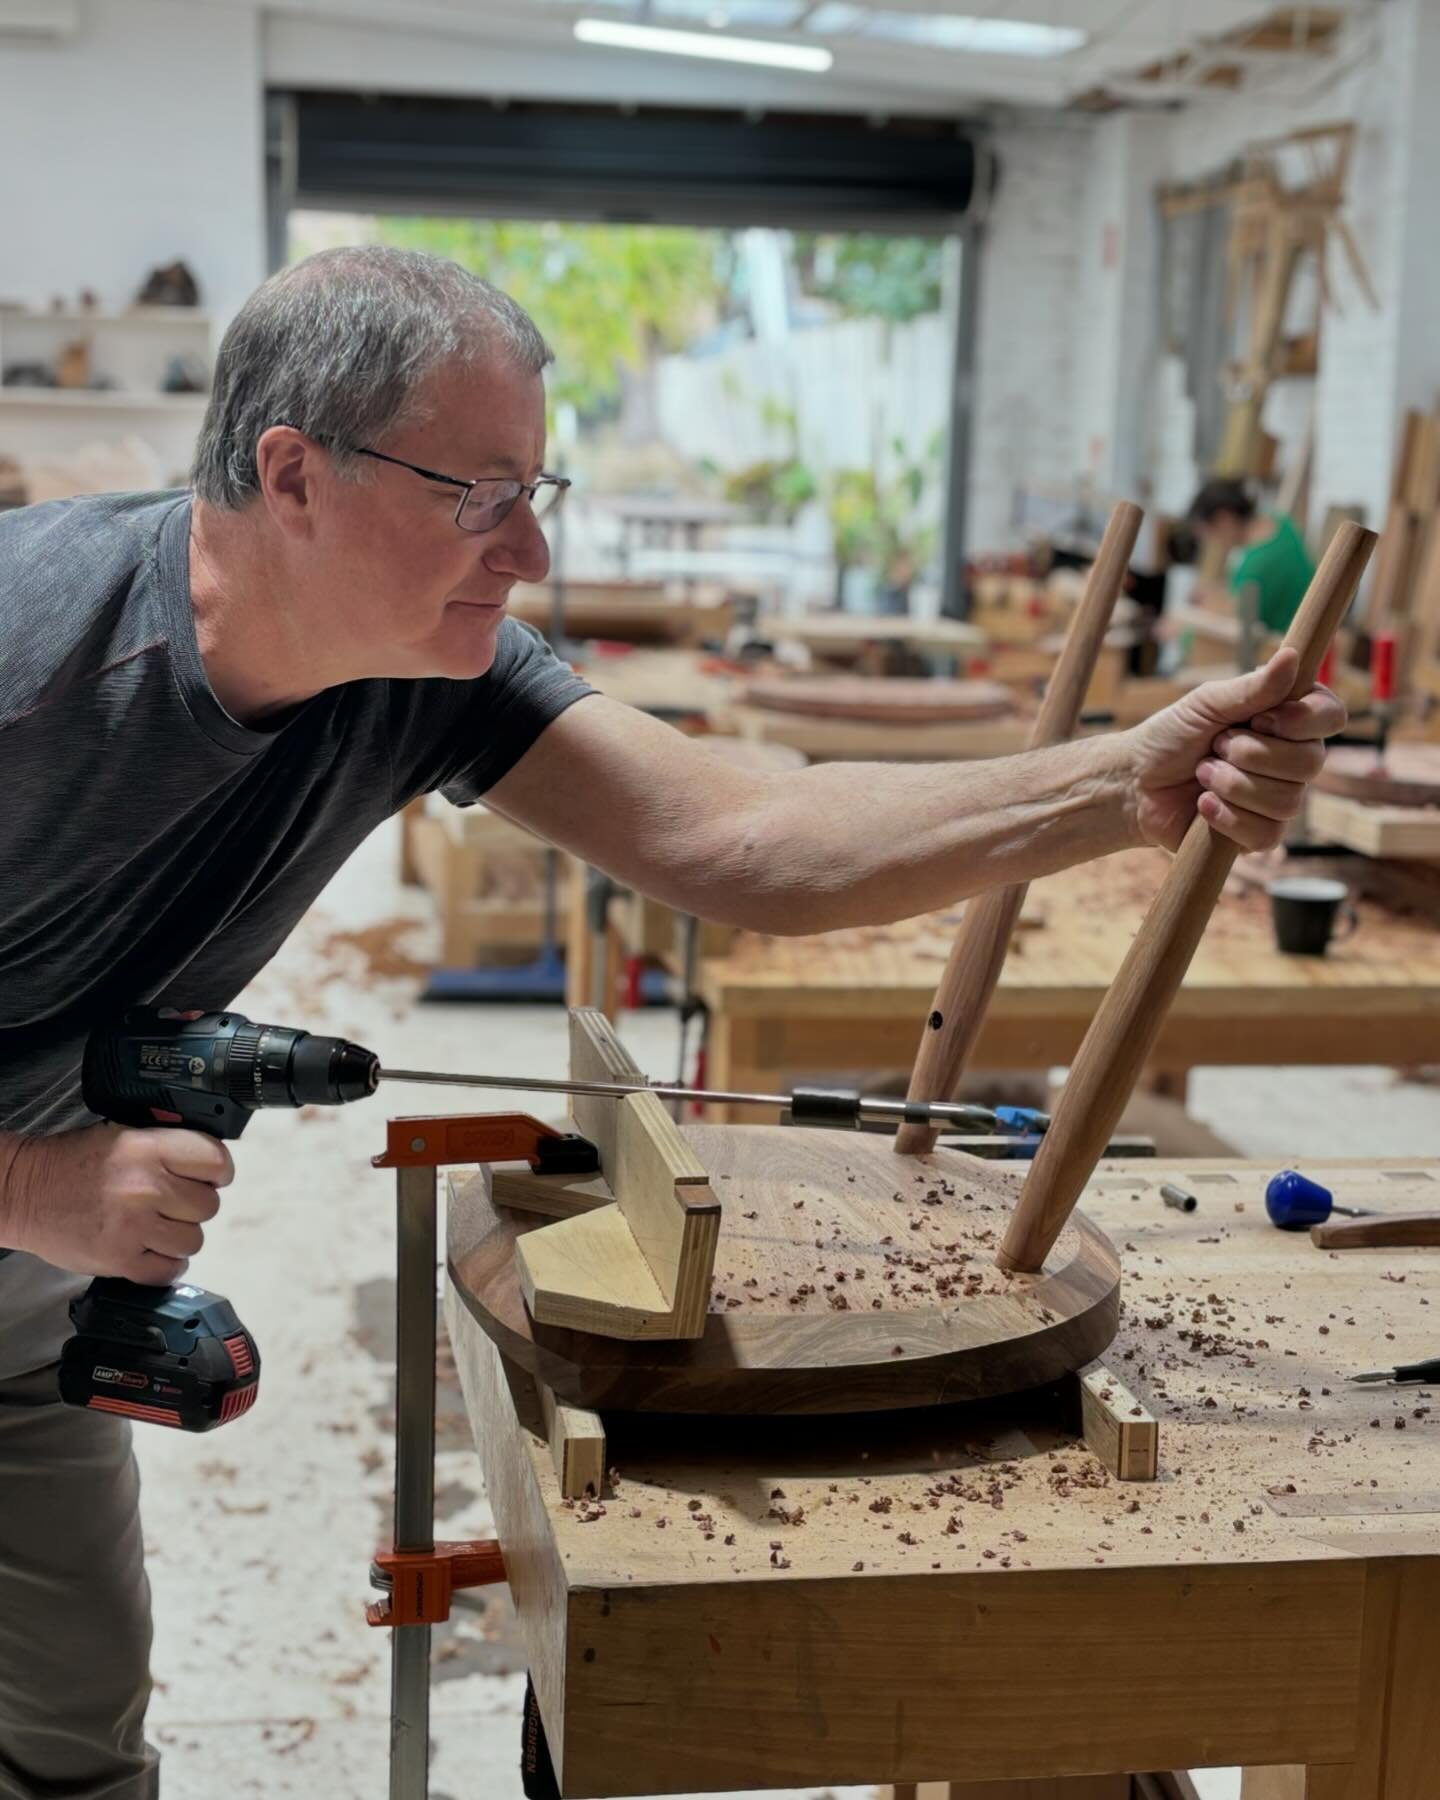 Mike drilling with an accuracy that comes naturally to all people from the state of Michigan.
.
.
#chairclass #chairmakingcourses #woodworkingclasses #chairmaker #chairmaking